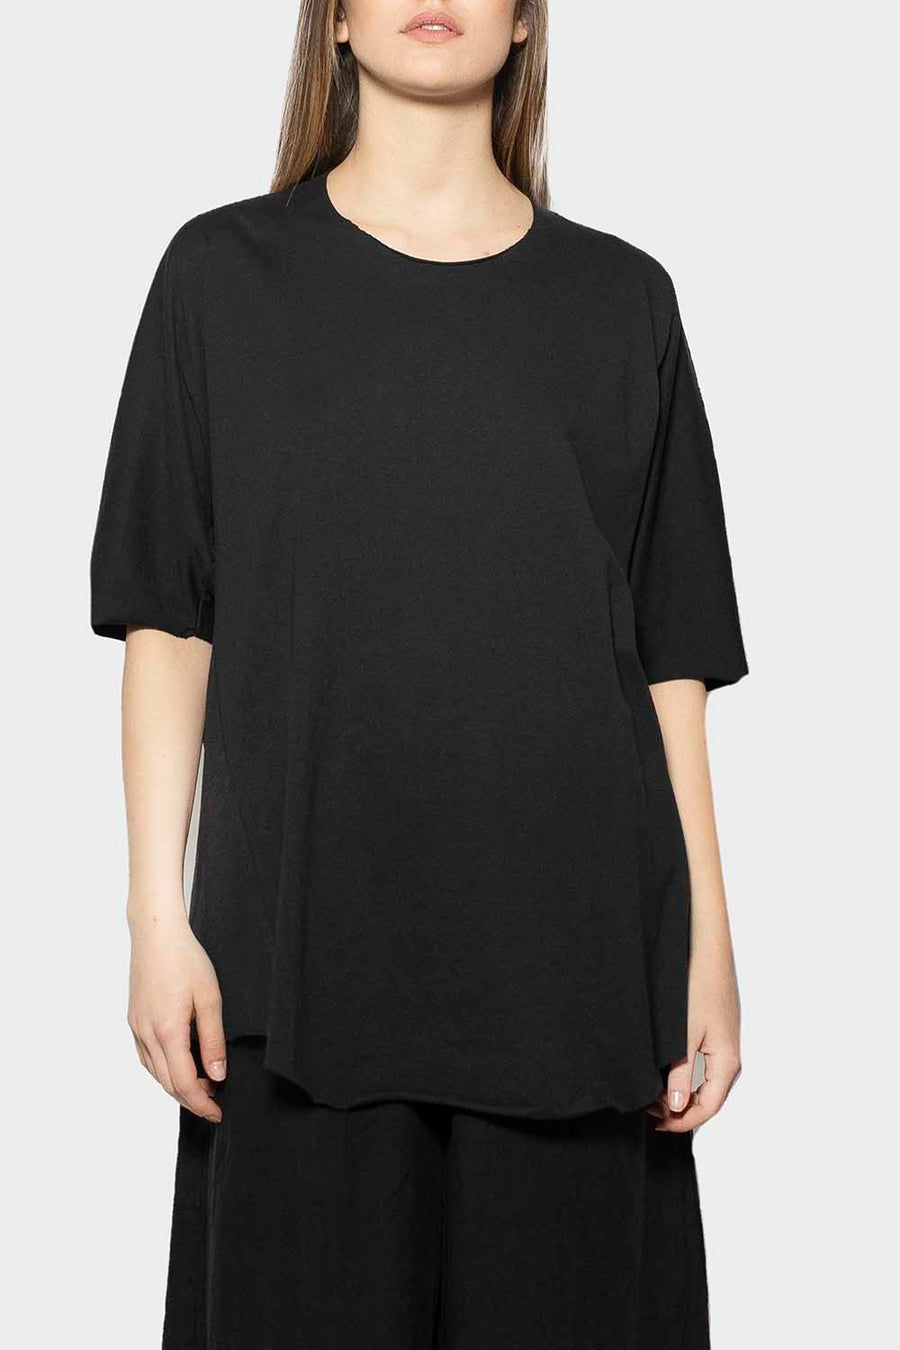 T-shirt Oversize Isabella Clementini in jersey nero  i1285